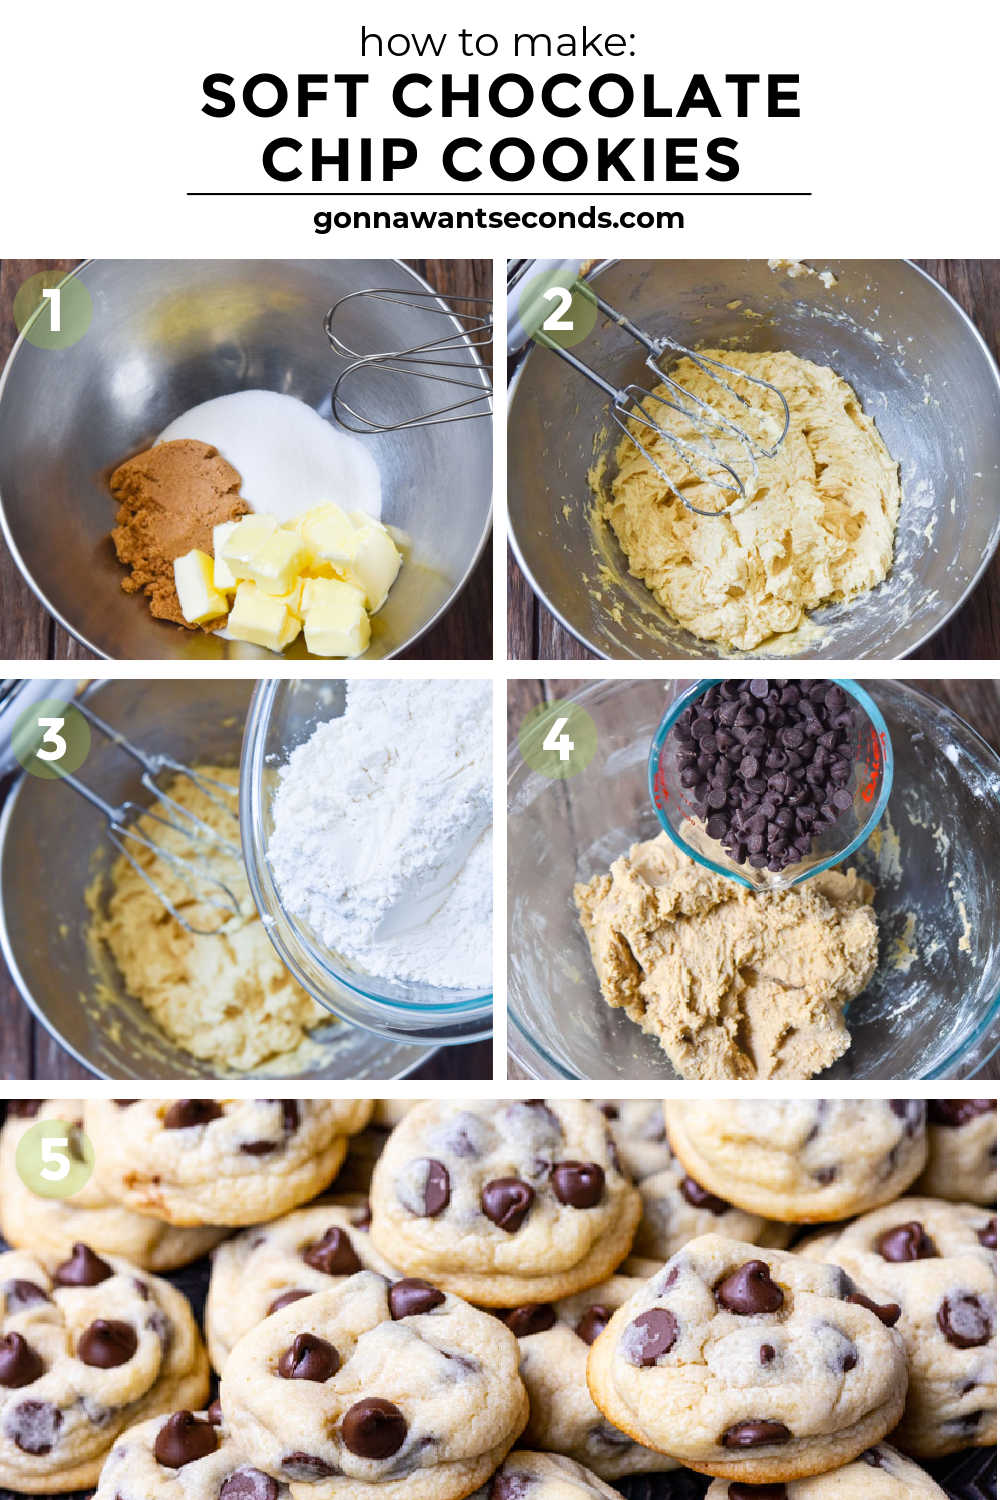 Step by step How to make soft chocolate chip cookies